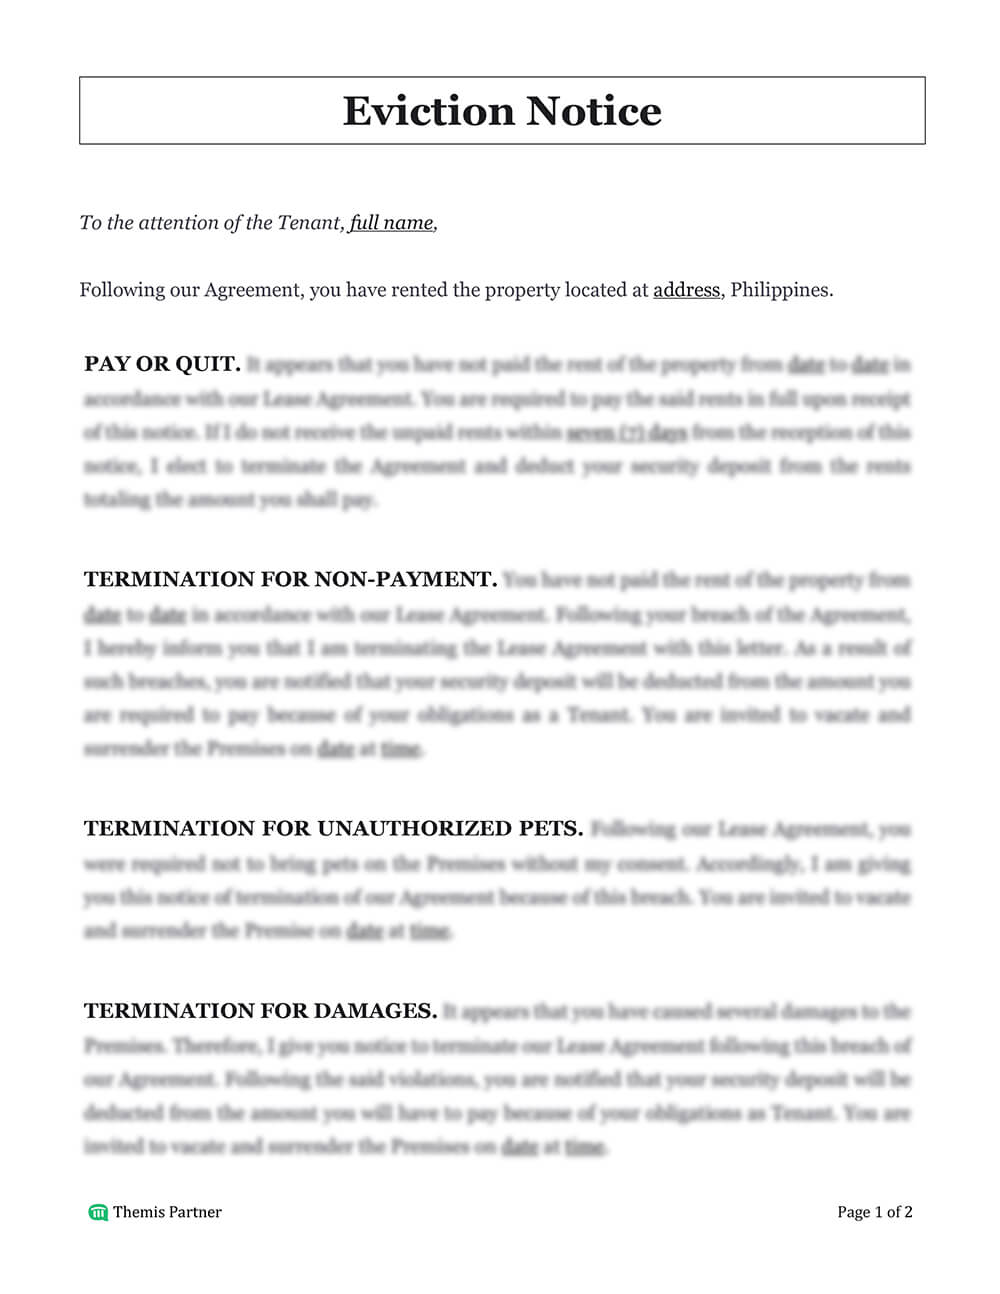 Eviction notice letter template